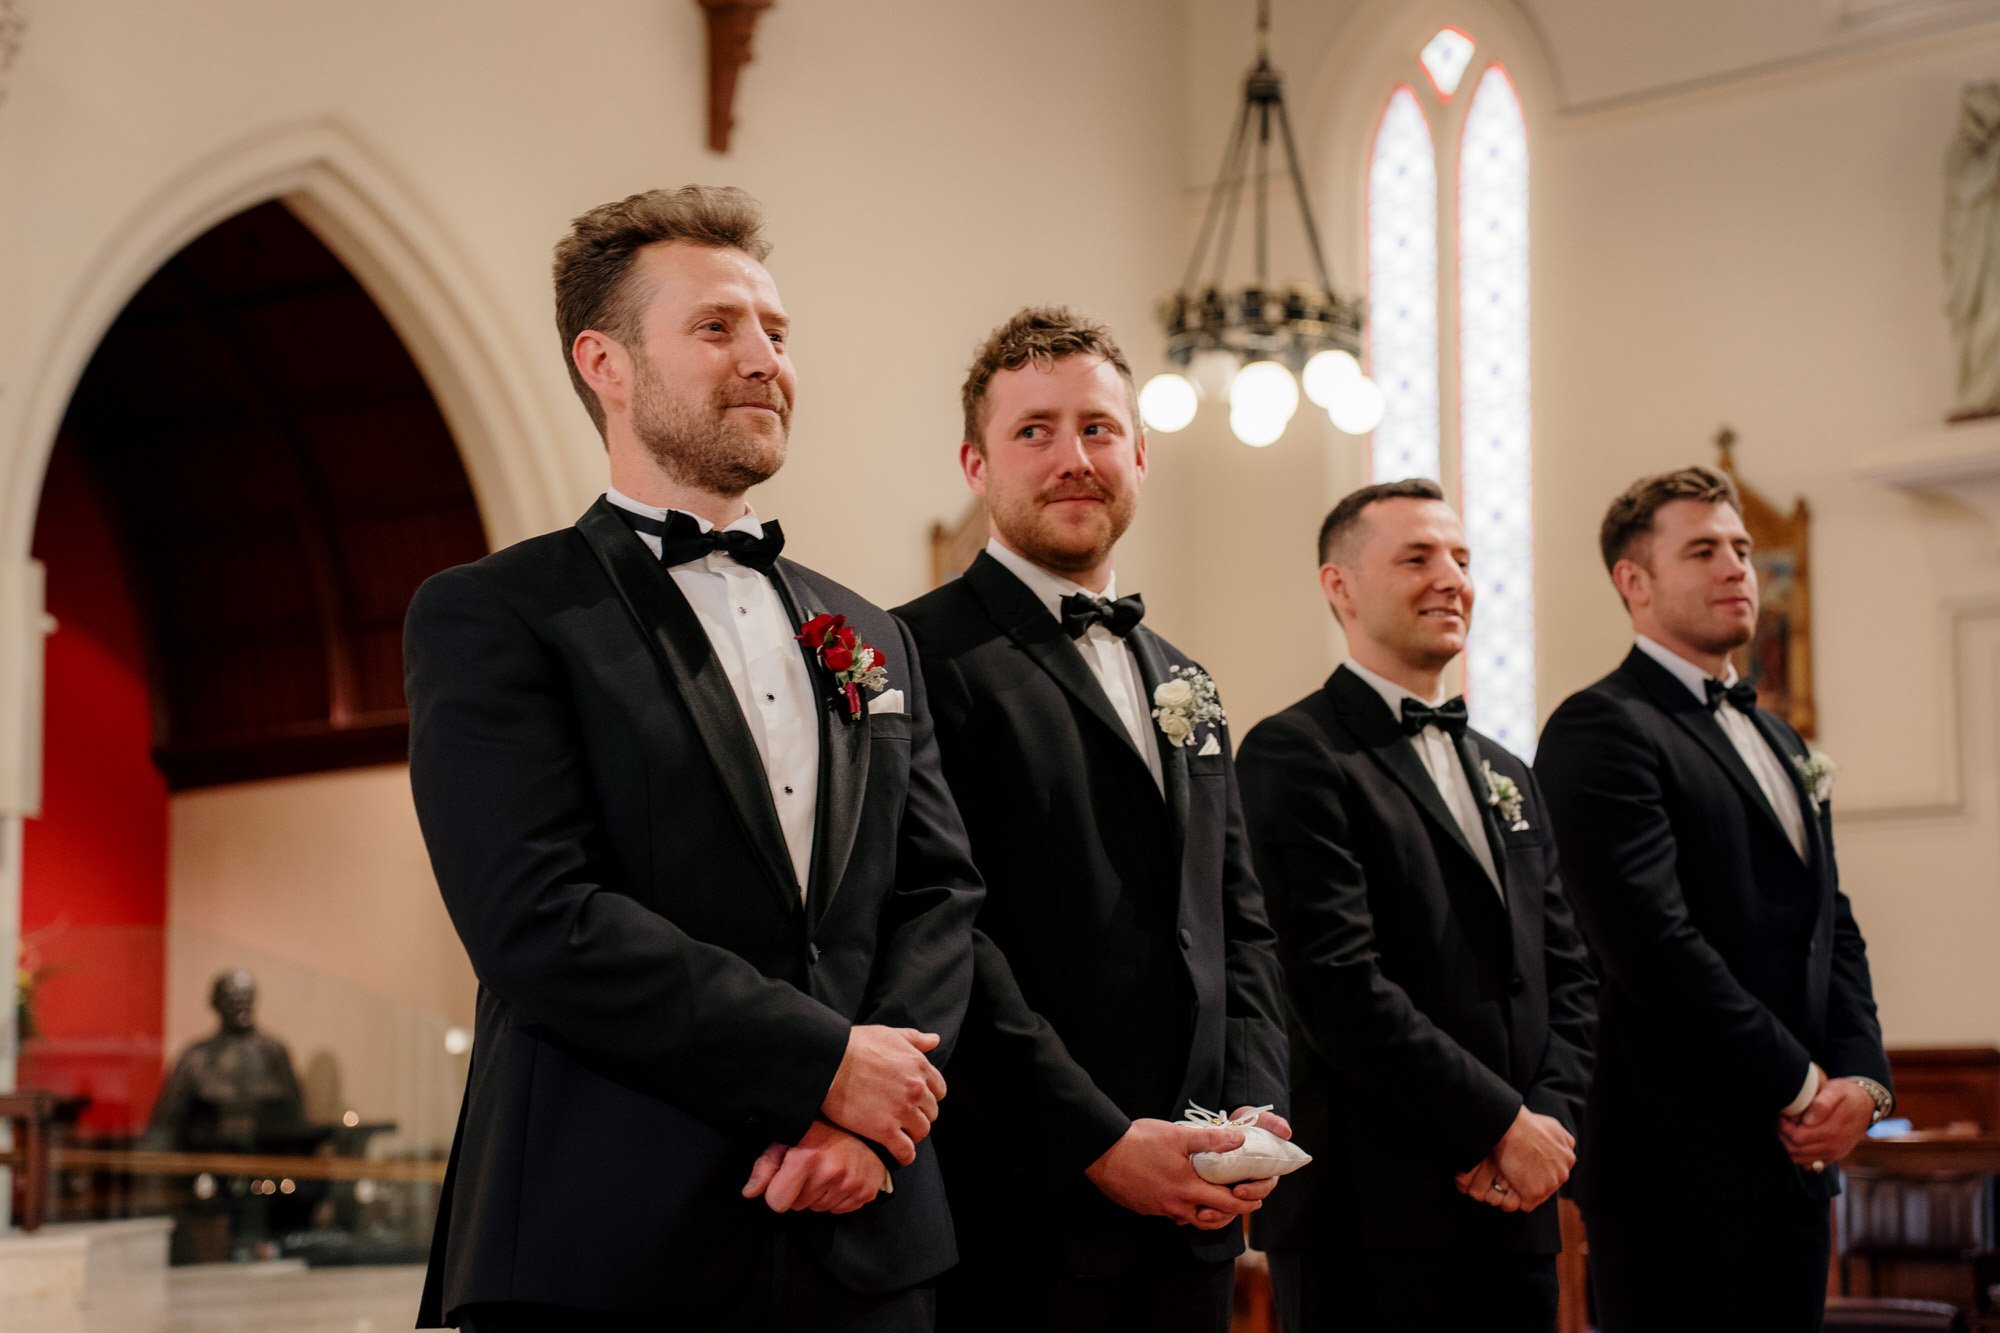 mantells-mt-eden-st-patricks-cathedral-alberton-house-top-auckland-wedding-phtographer-2023-photography-videography-film-new-zealand-NZ-best-urban-venue-catholic-ceremony-dear-white-productions (137).jpg